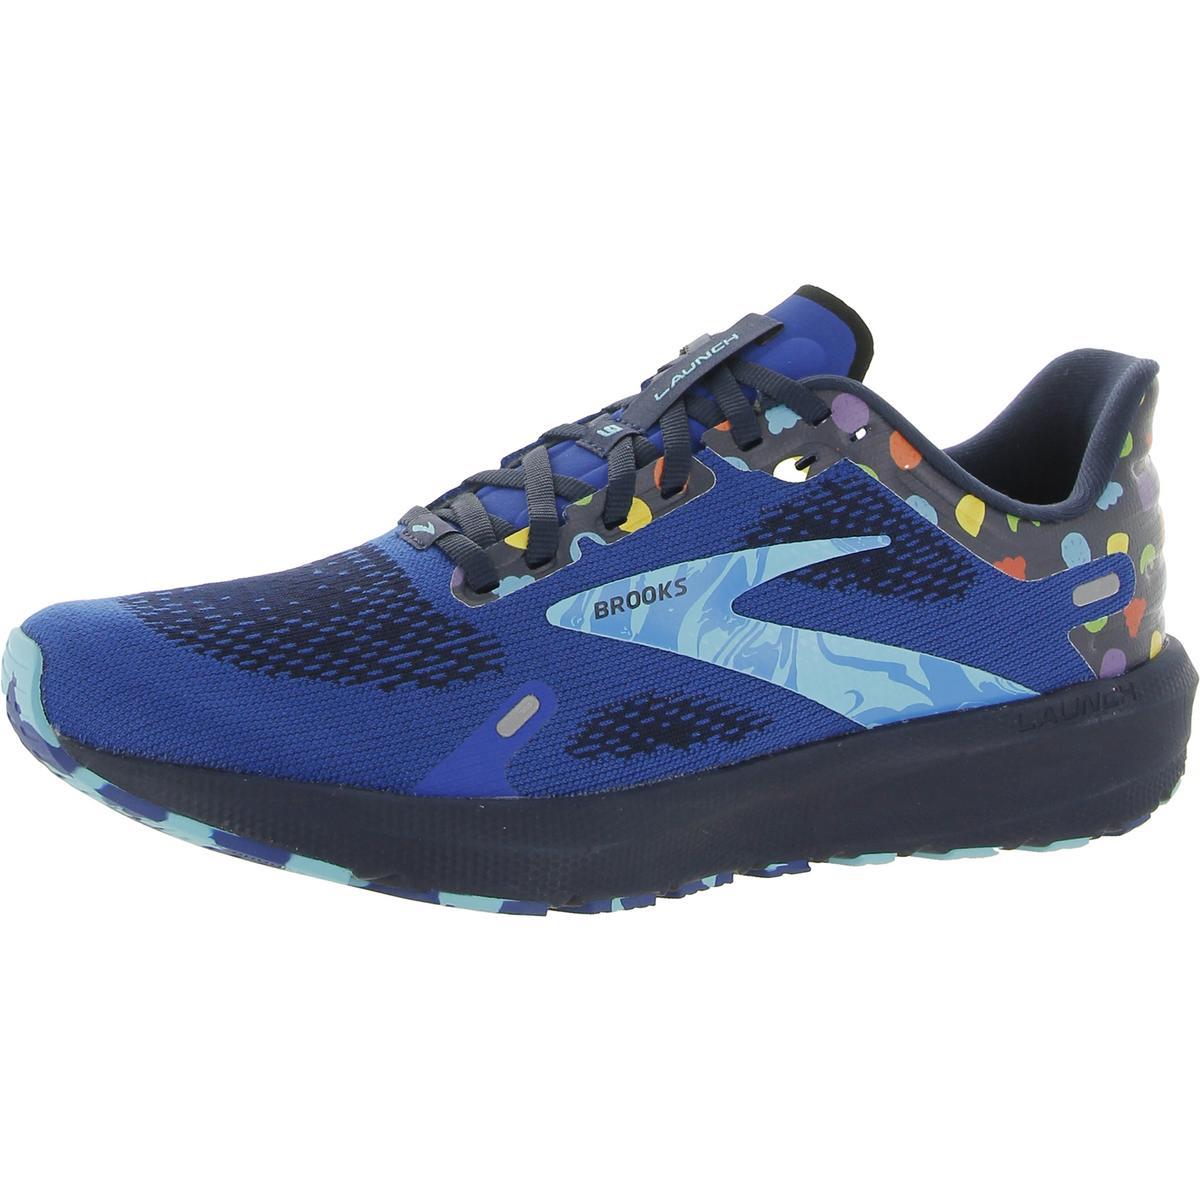 Brooks Mens Launch 9 Trainers Fitness Mesh Running Shoes Sneakers Bhfo 3592 Blue/Peacoat/Yellow